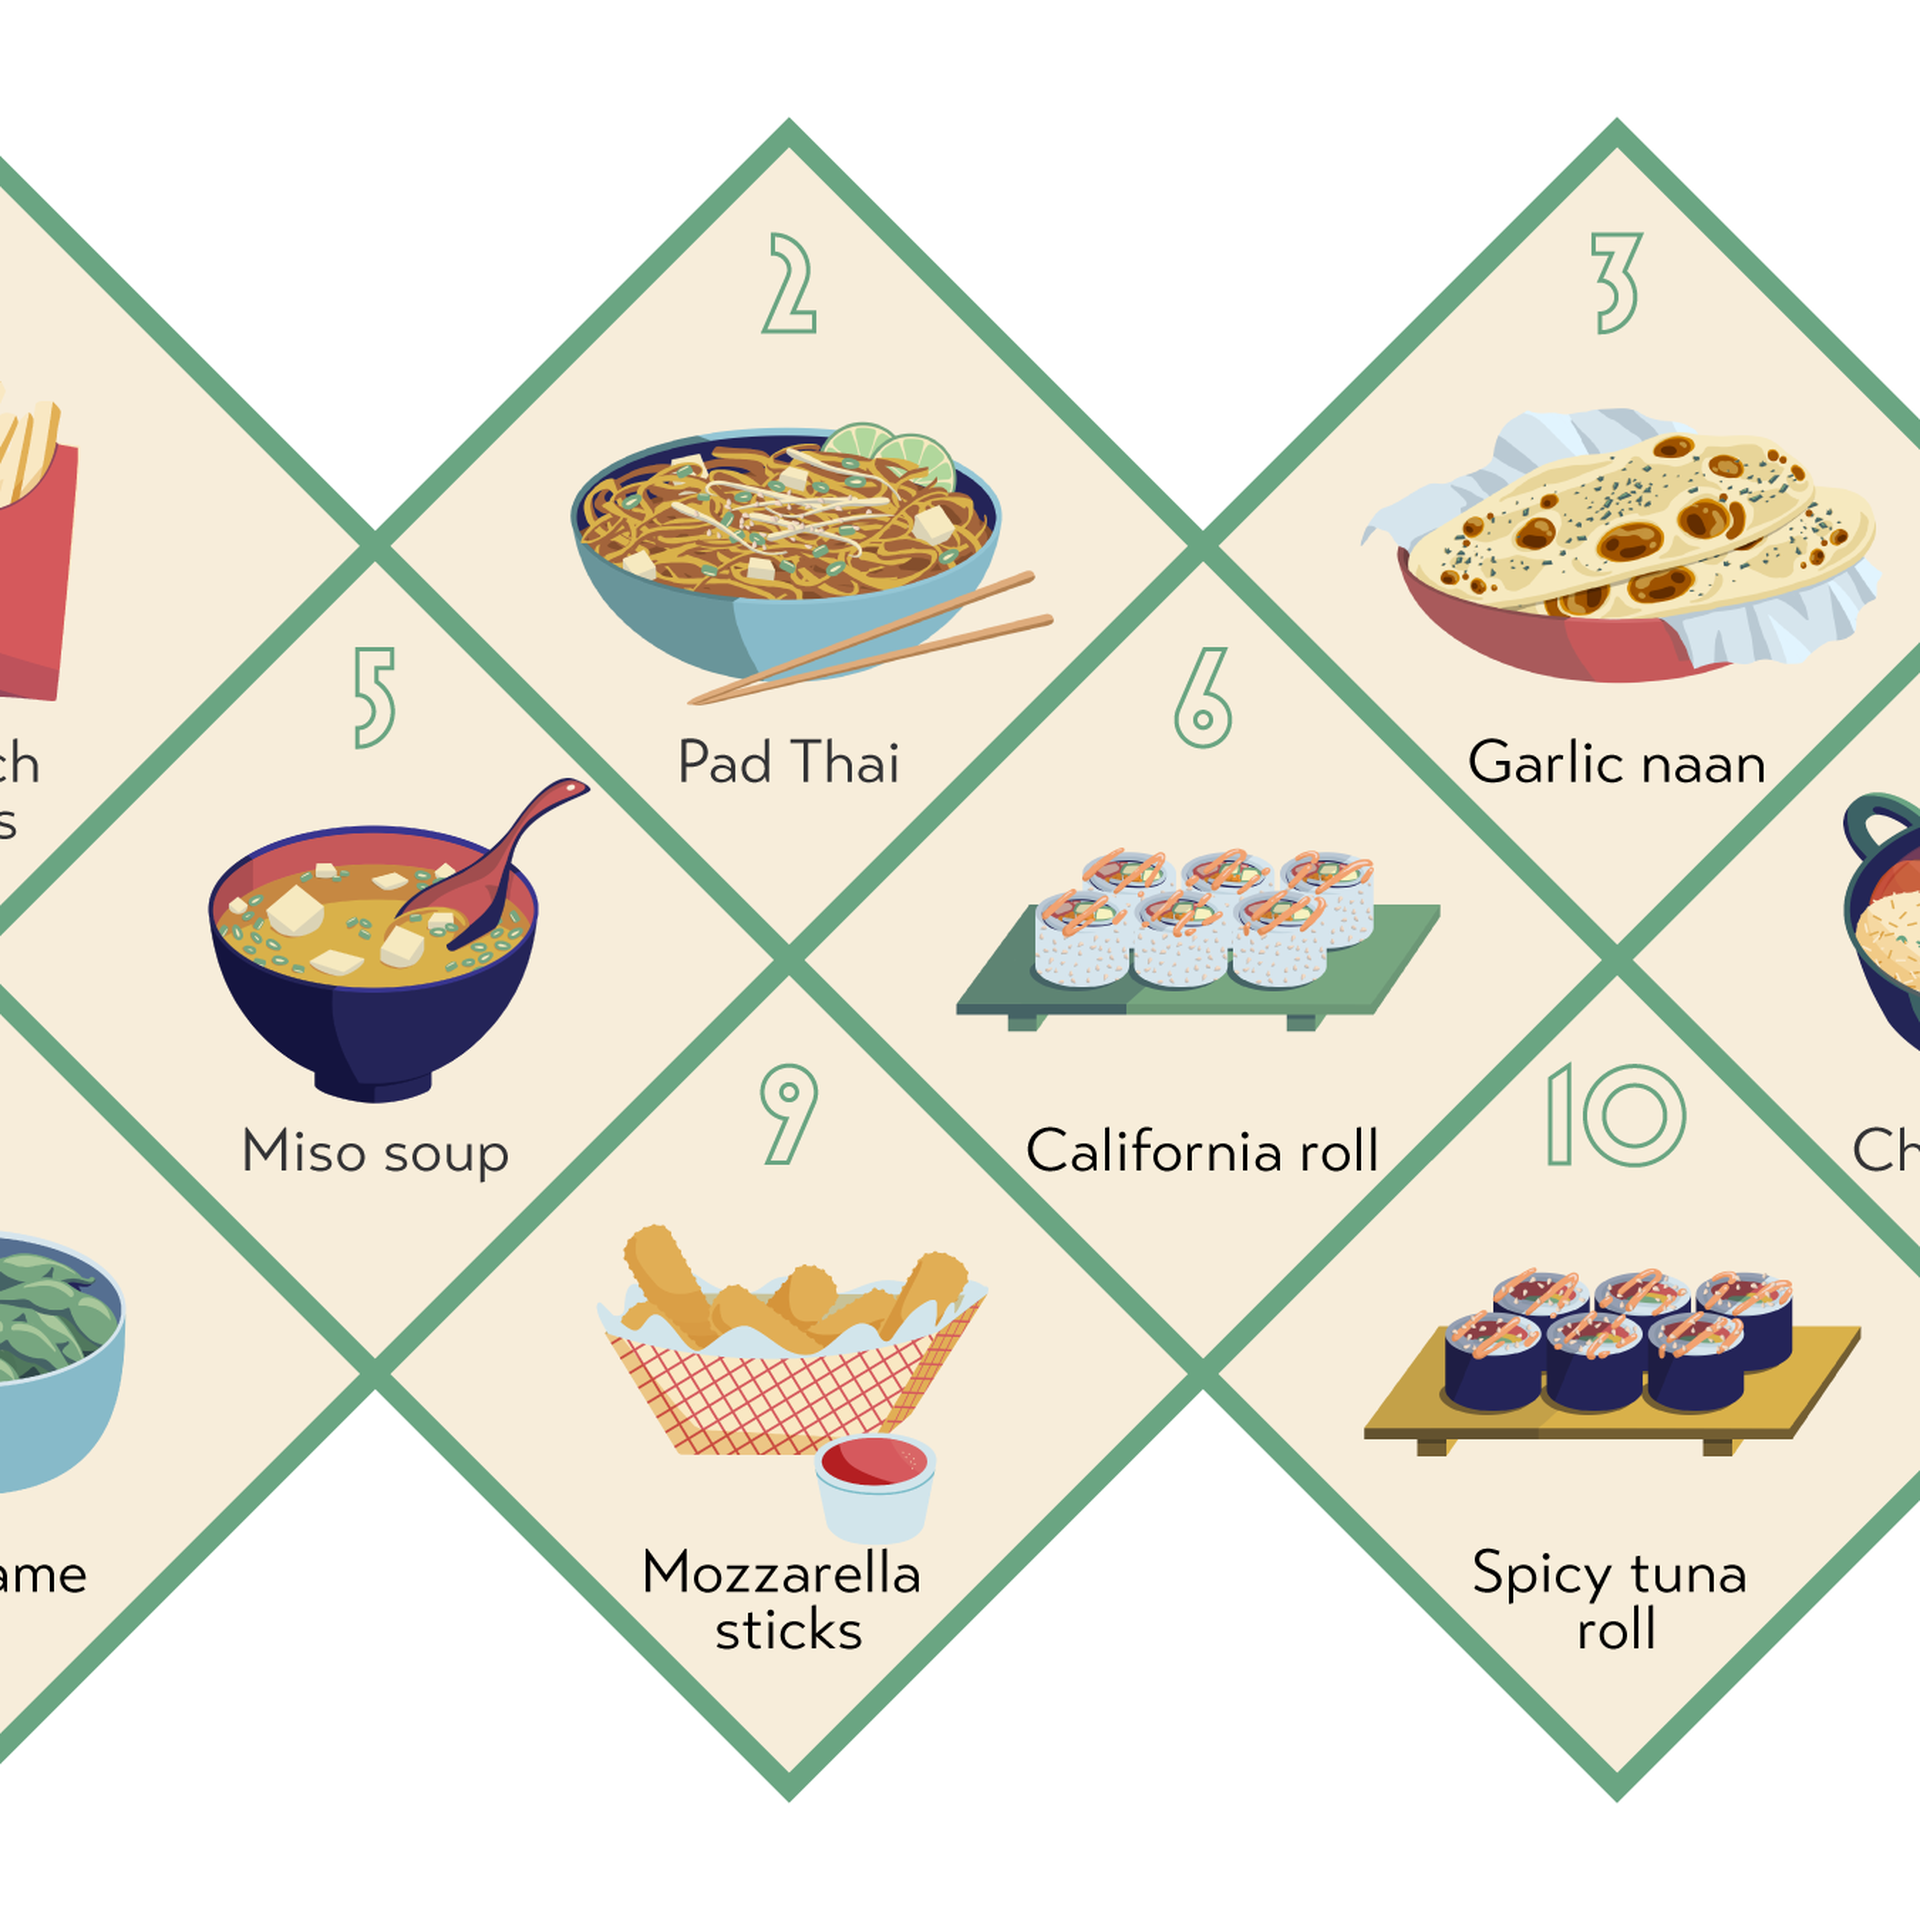 Illustrations of the top 10 most ordered foods in 2021: French fries, Pad Thai, Garlic naan, Soda, Miso soup, California roll, Chiken tikka masala, Edamame, Mozzarella sticks, Spicy tuna roll